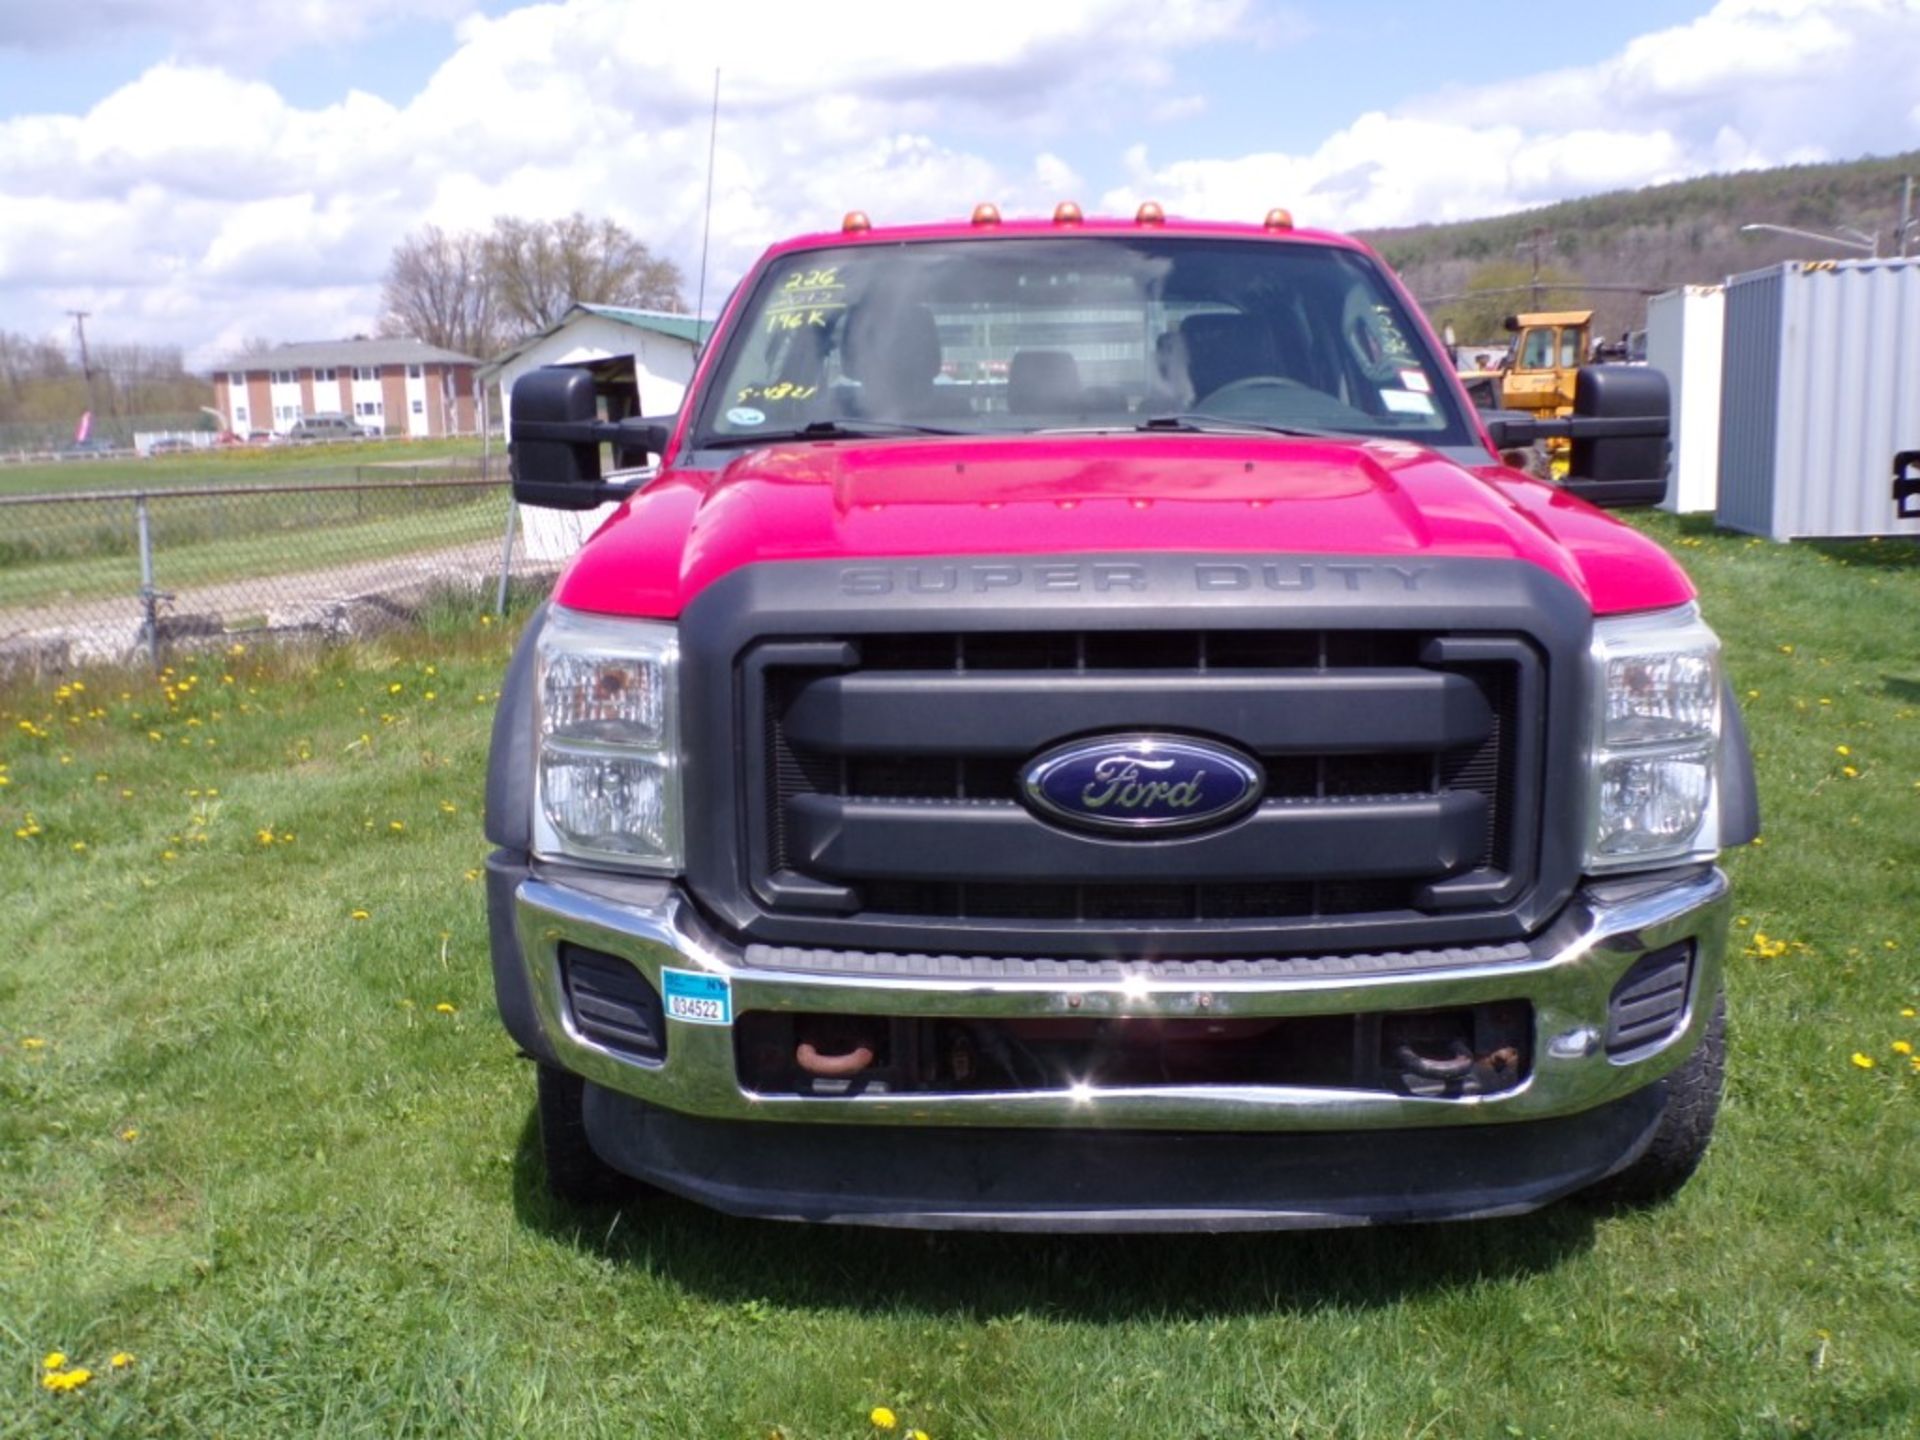 2012 Ford F550, 4 WD, Crew Cab, Flatbed, 6.7 Dsl. Engine, Auto Trans, PW, PL, Cruise, w/Eby 11'